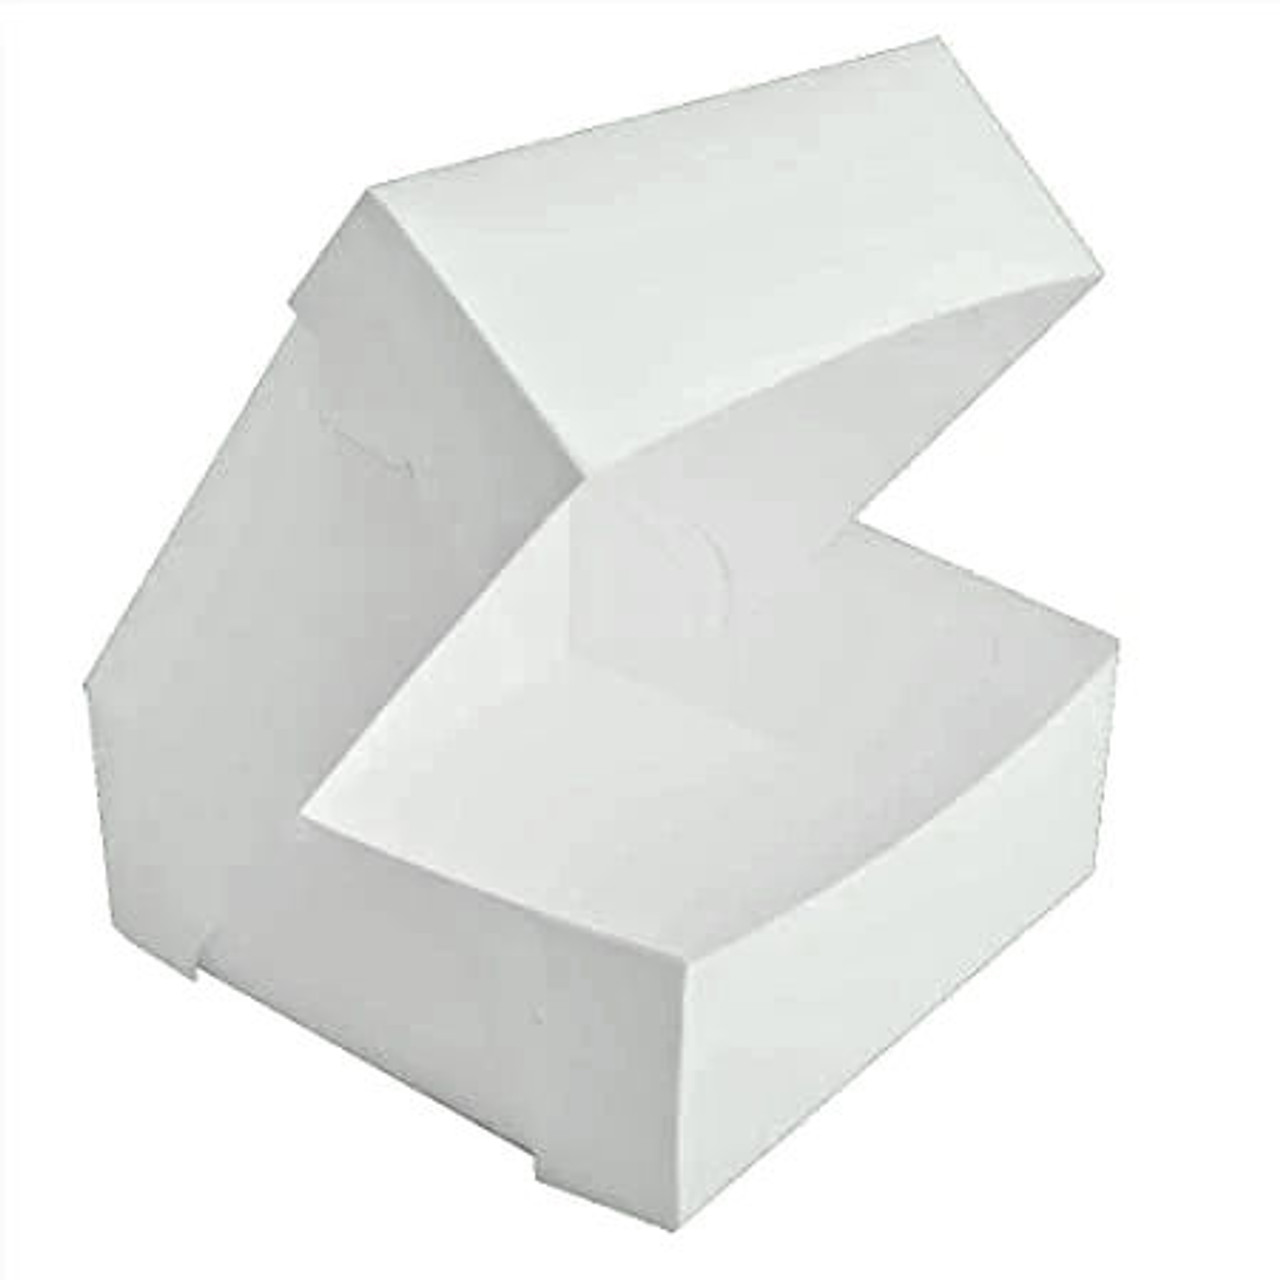 10"x10"x 5" ( 250 x 250 x 125mm ) 1 piece white Cake boxes MIS-PRINTED (see qty options)